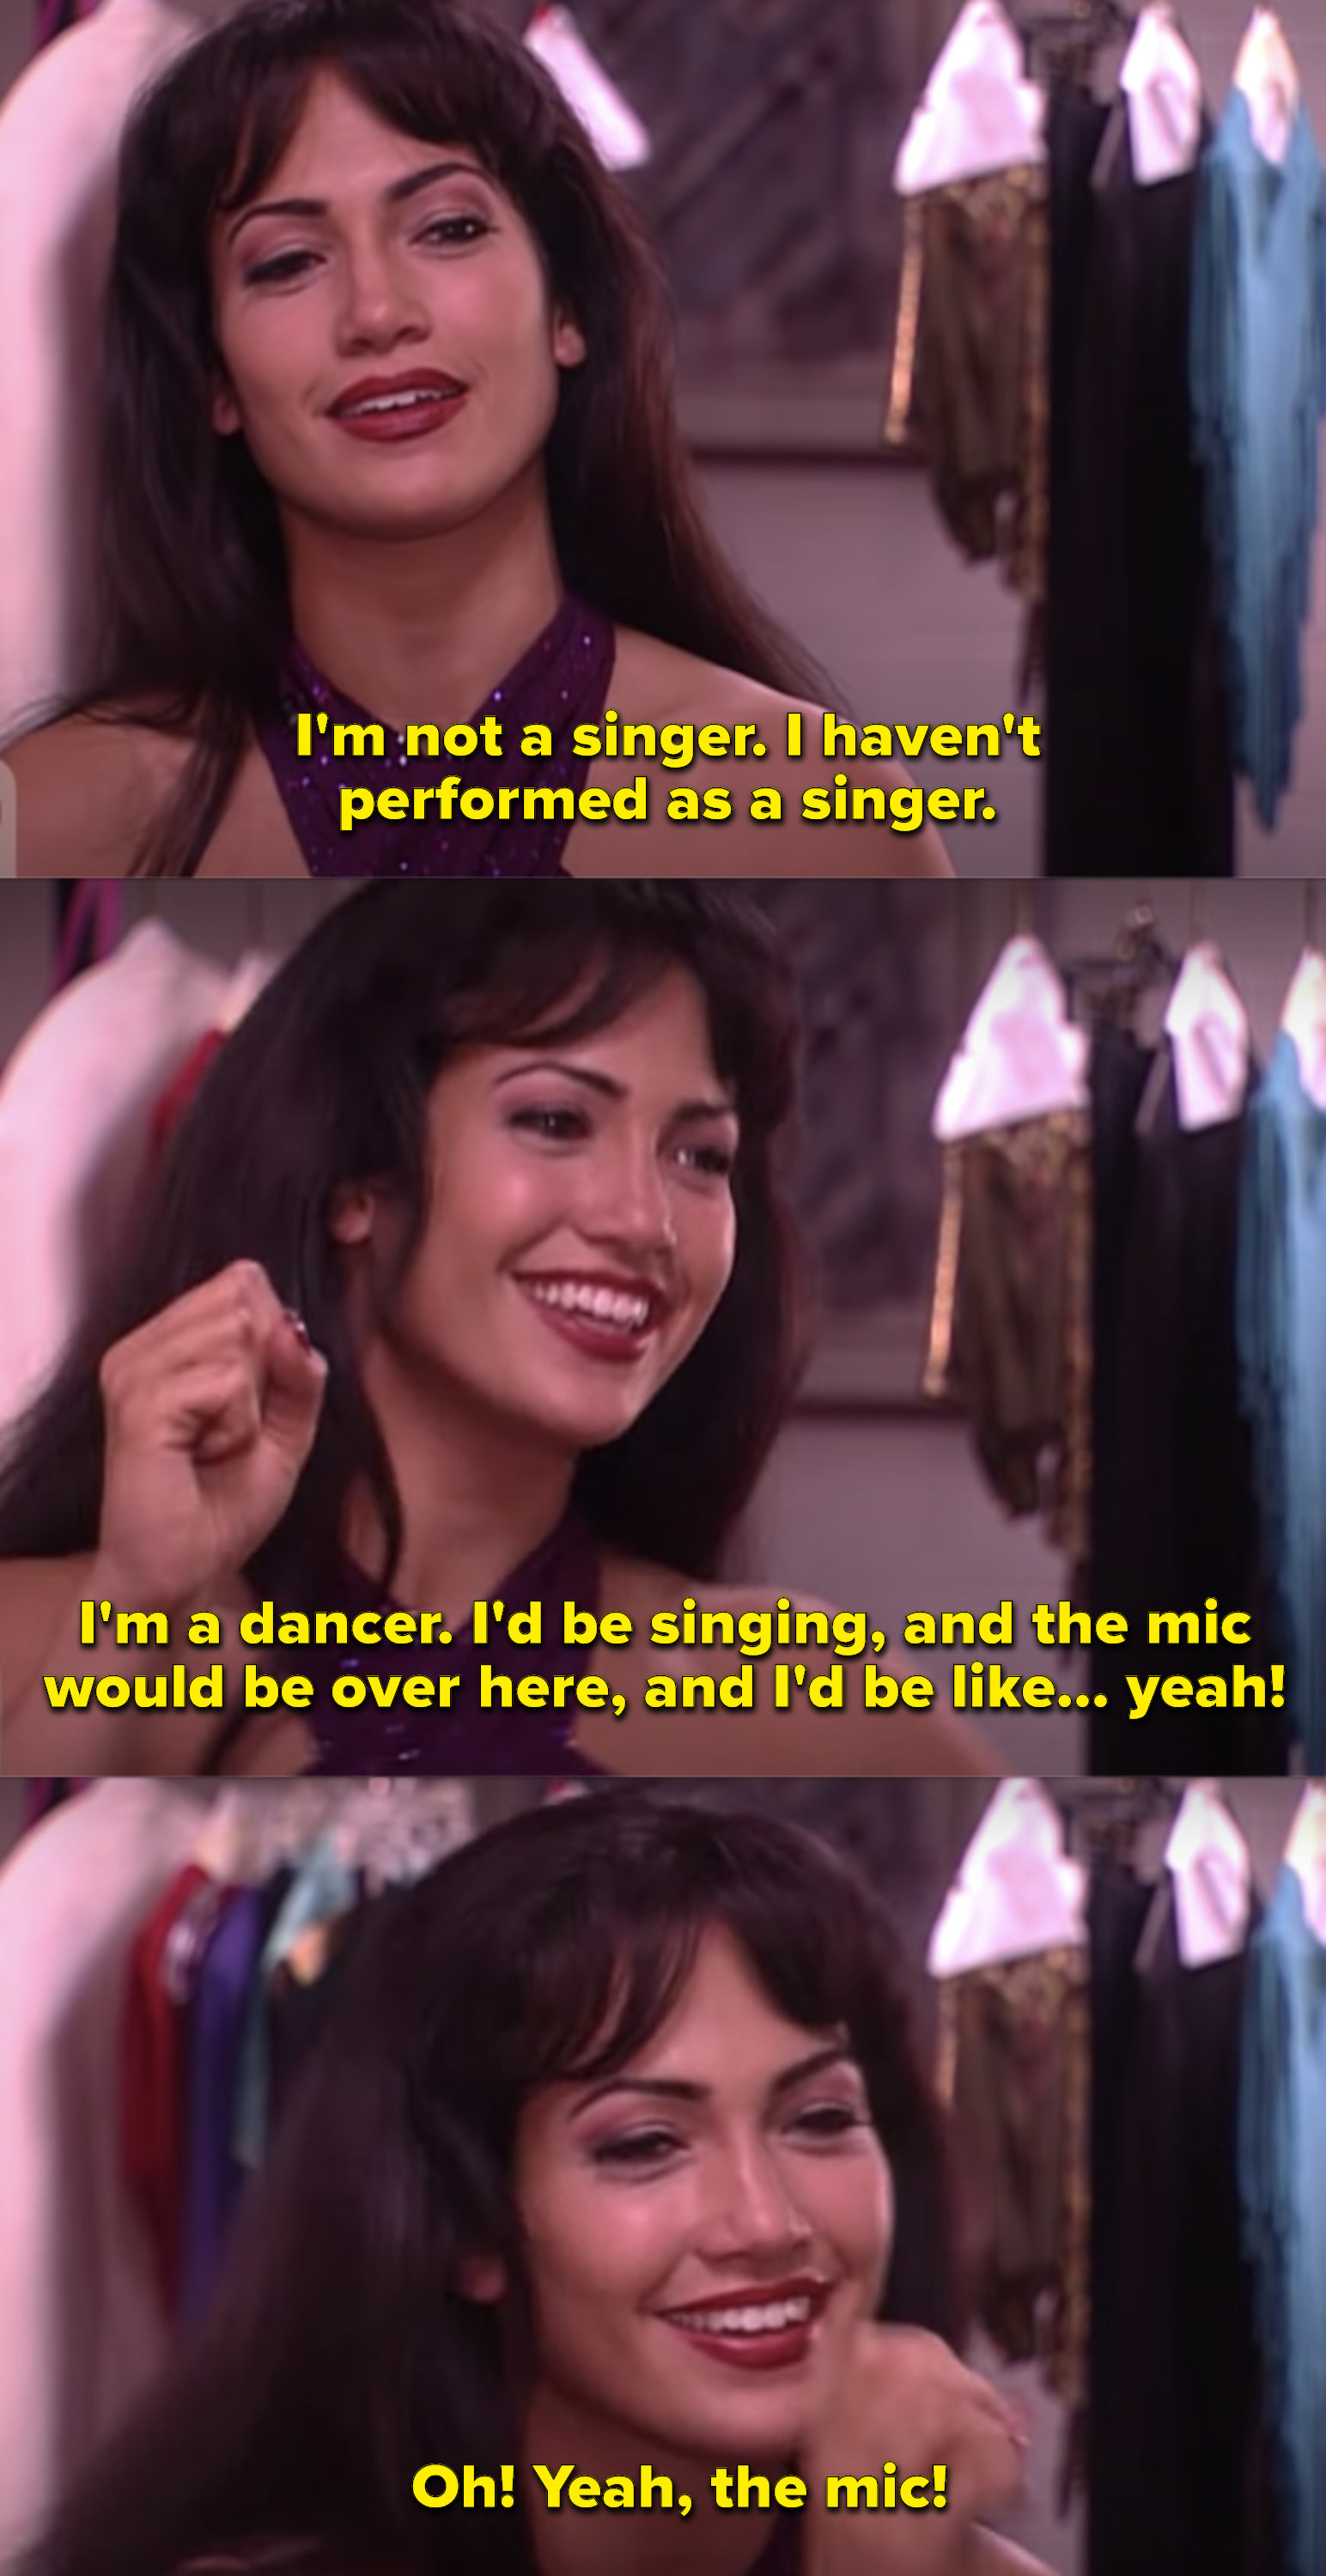 Jennifer Lopez in a behind-the-scenes interview while filming &quot;Selena&quot;